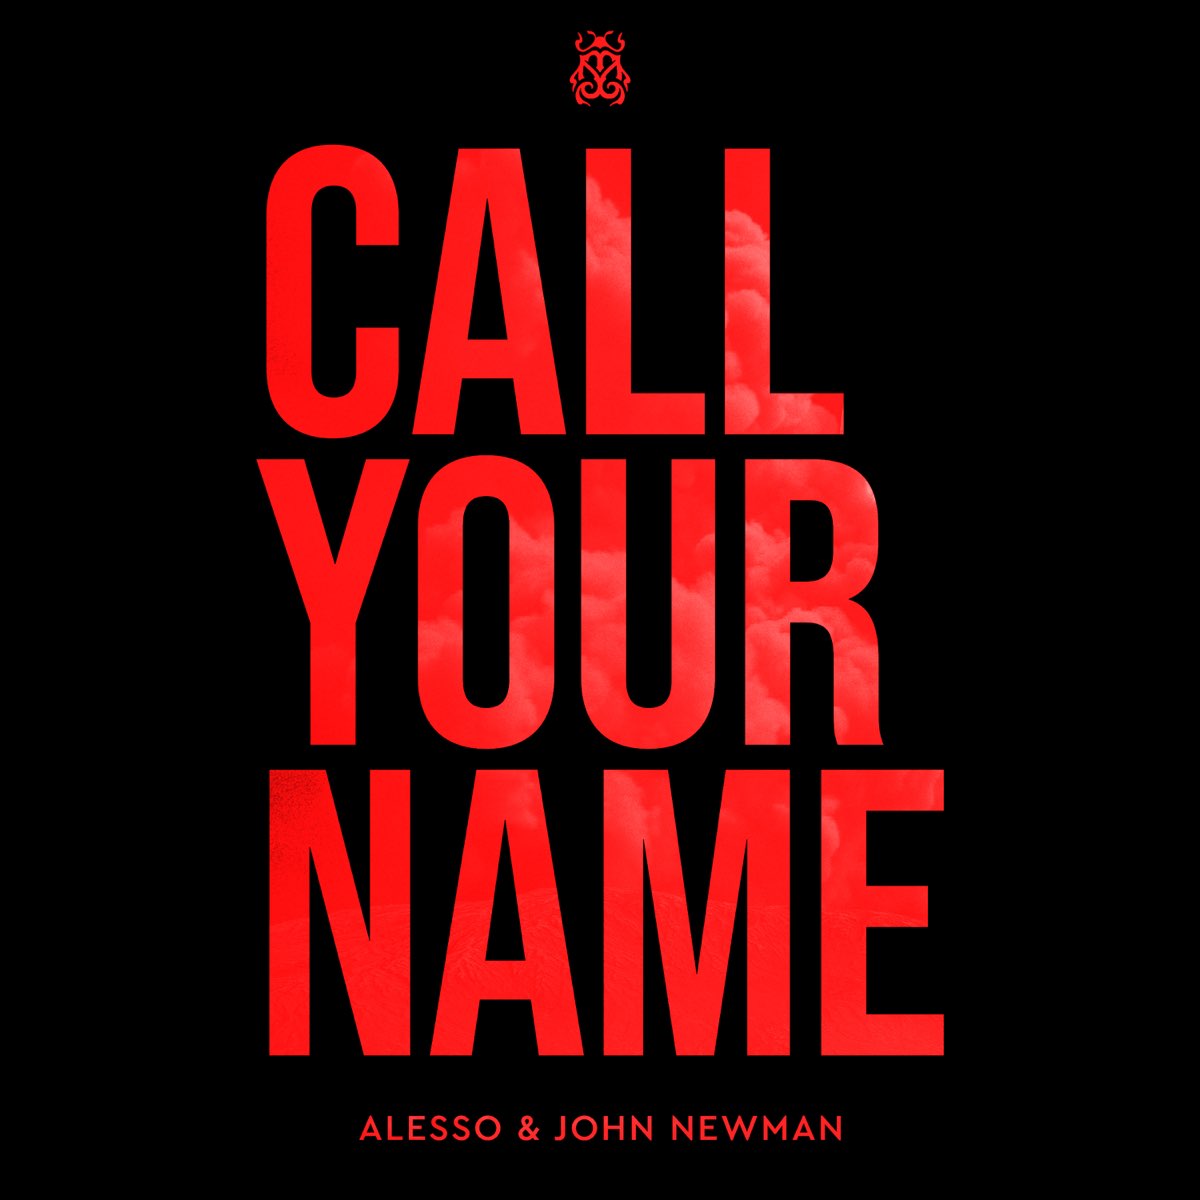 Alesso & John Newman Call Your Name cover artwork